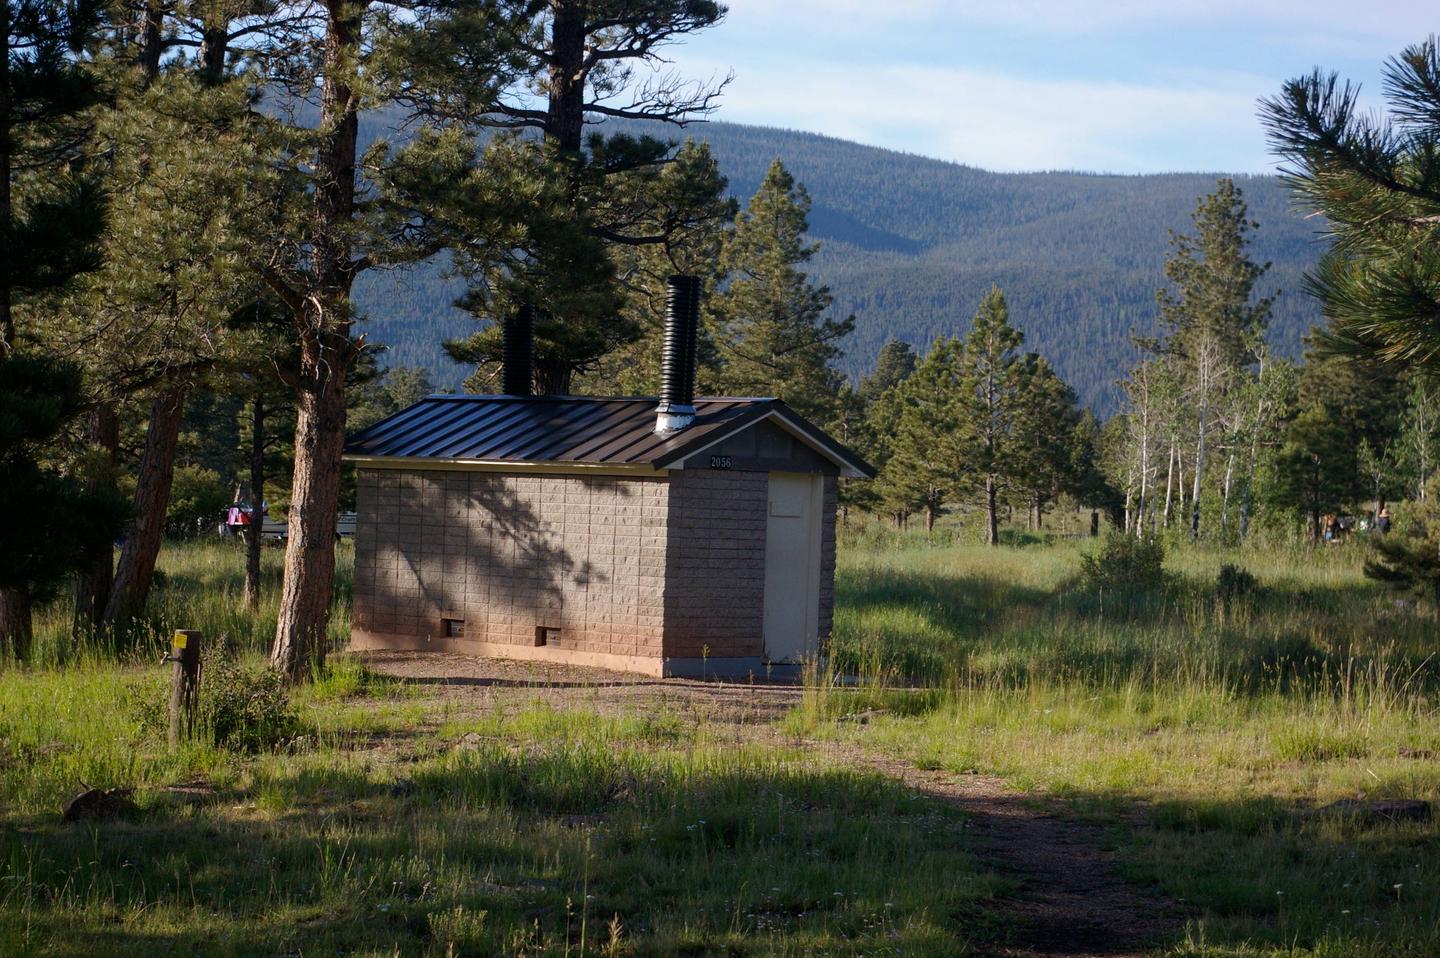 Brick building with a siding roof that houses the restrooms.Canyon Rim Campground: Restroom facilities